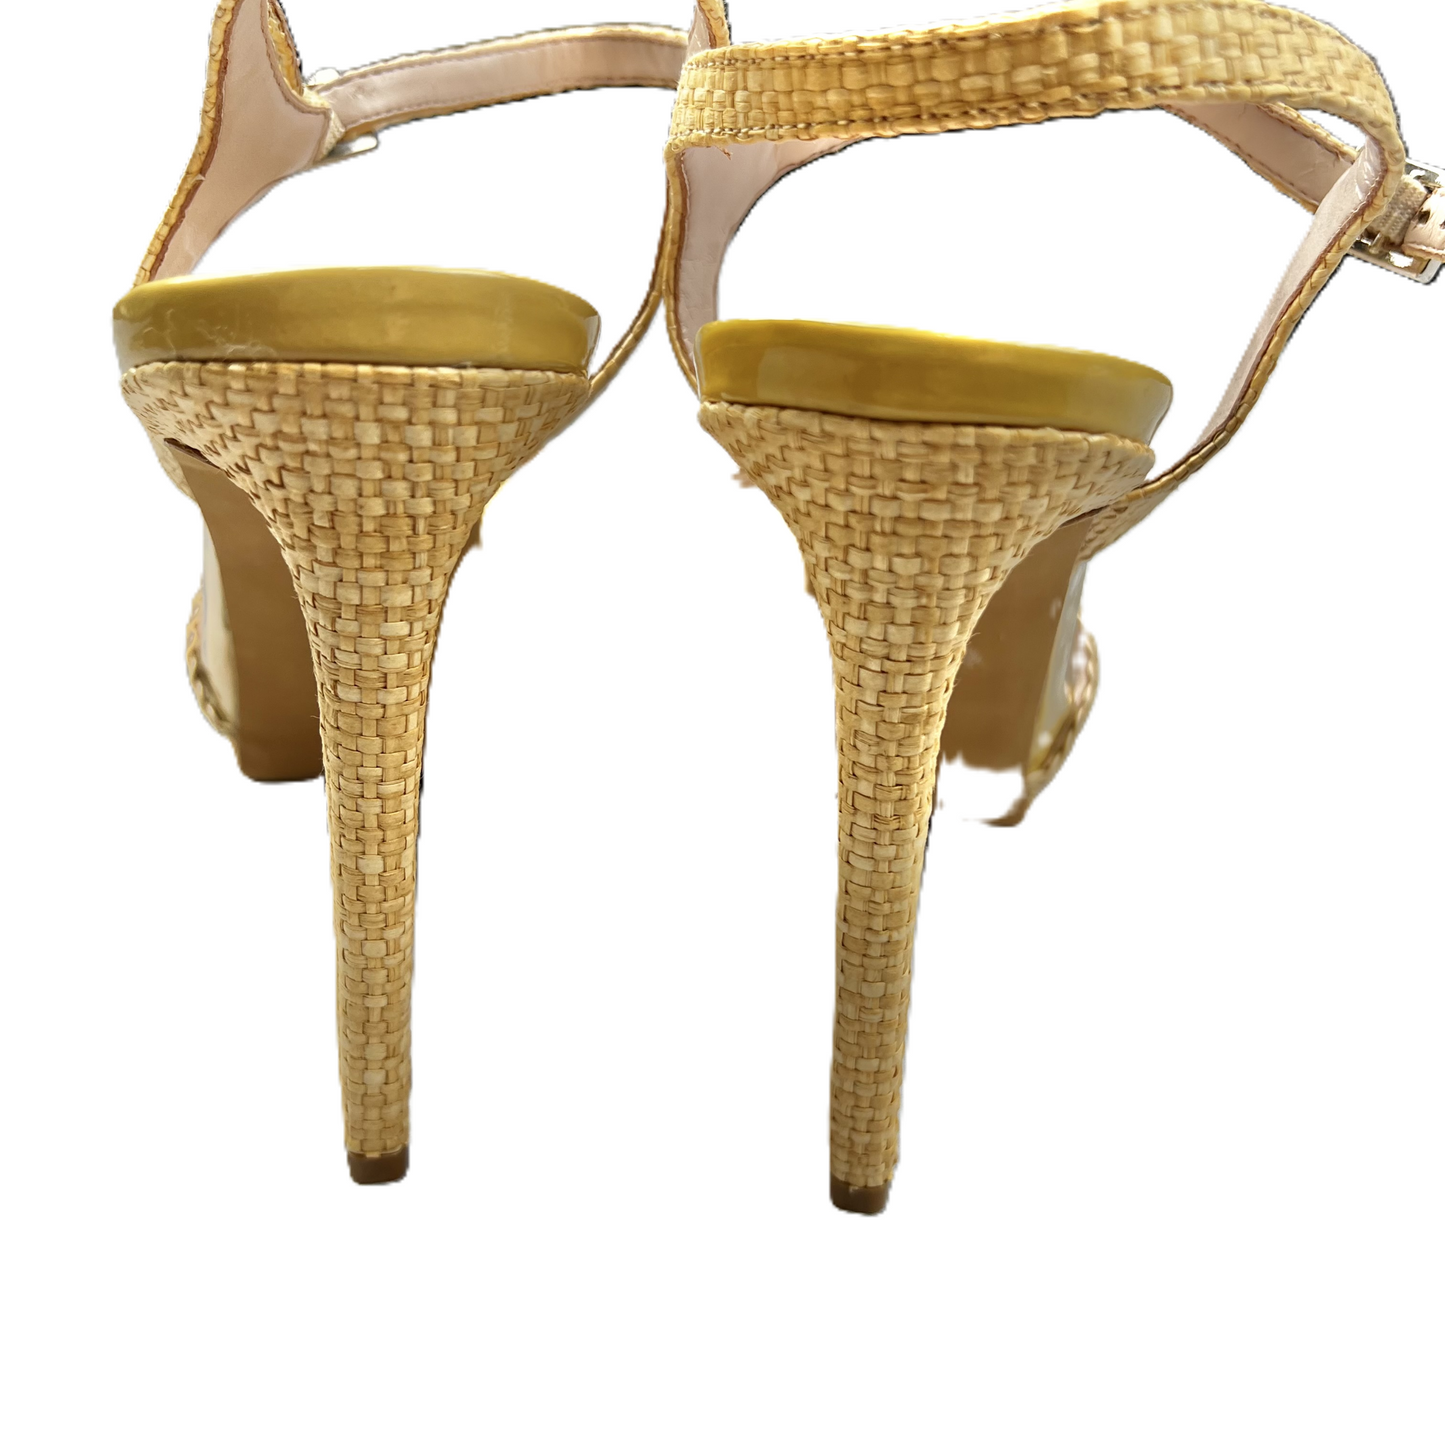 Beige Shoes Heels Stiletto By Vince Camuto, Size: 9.5